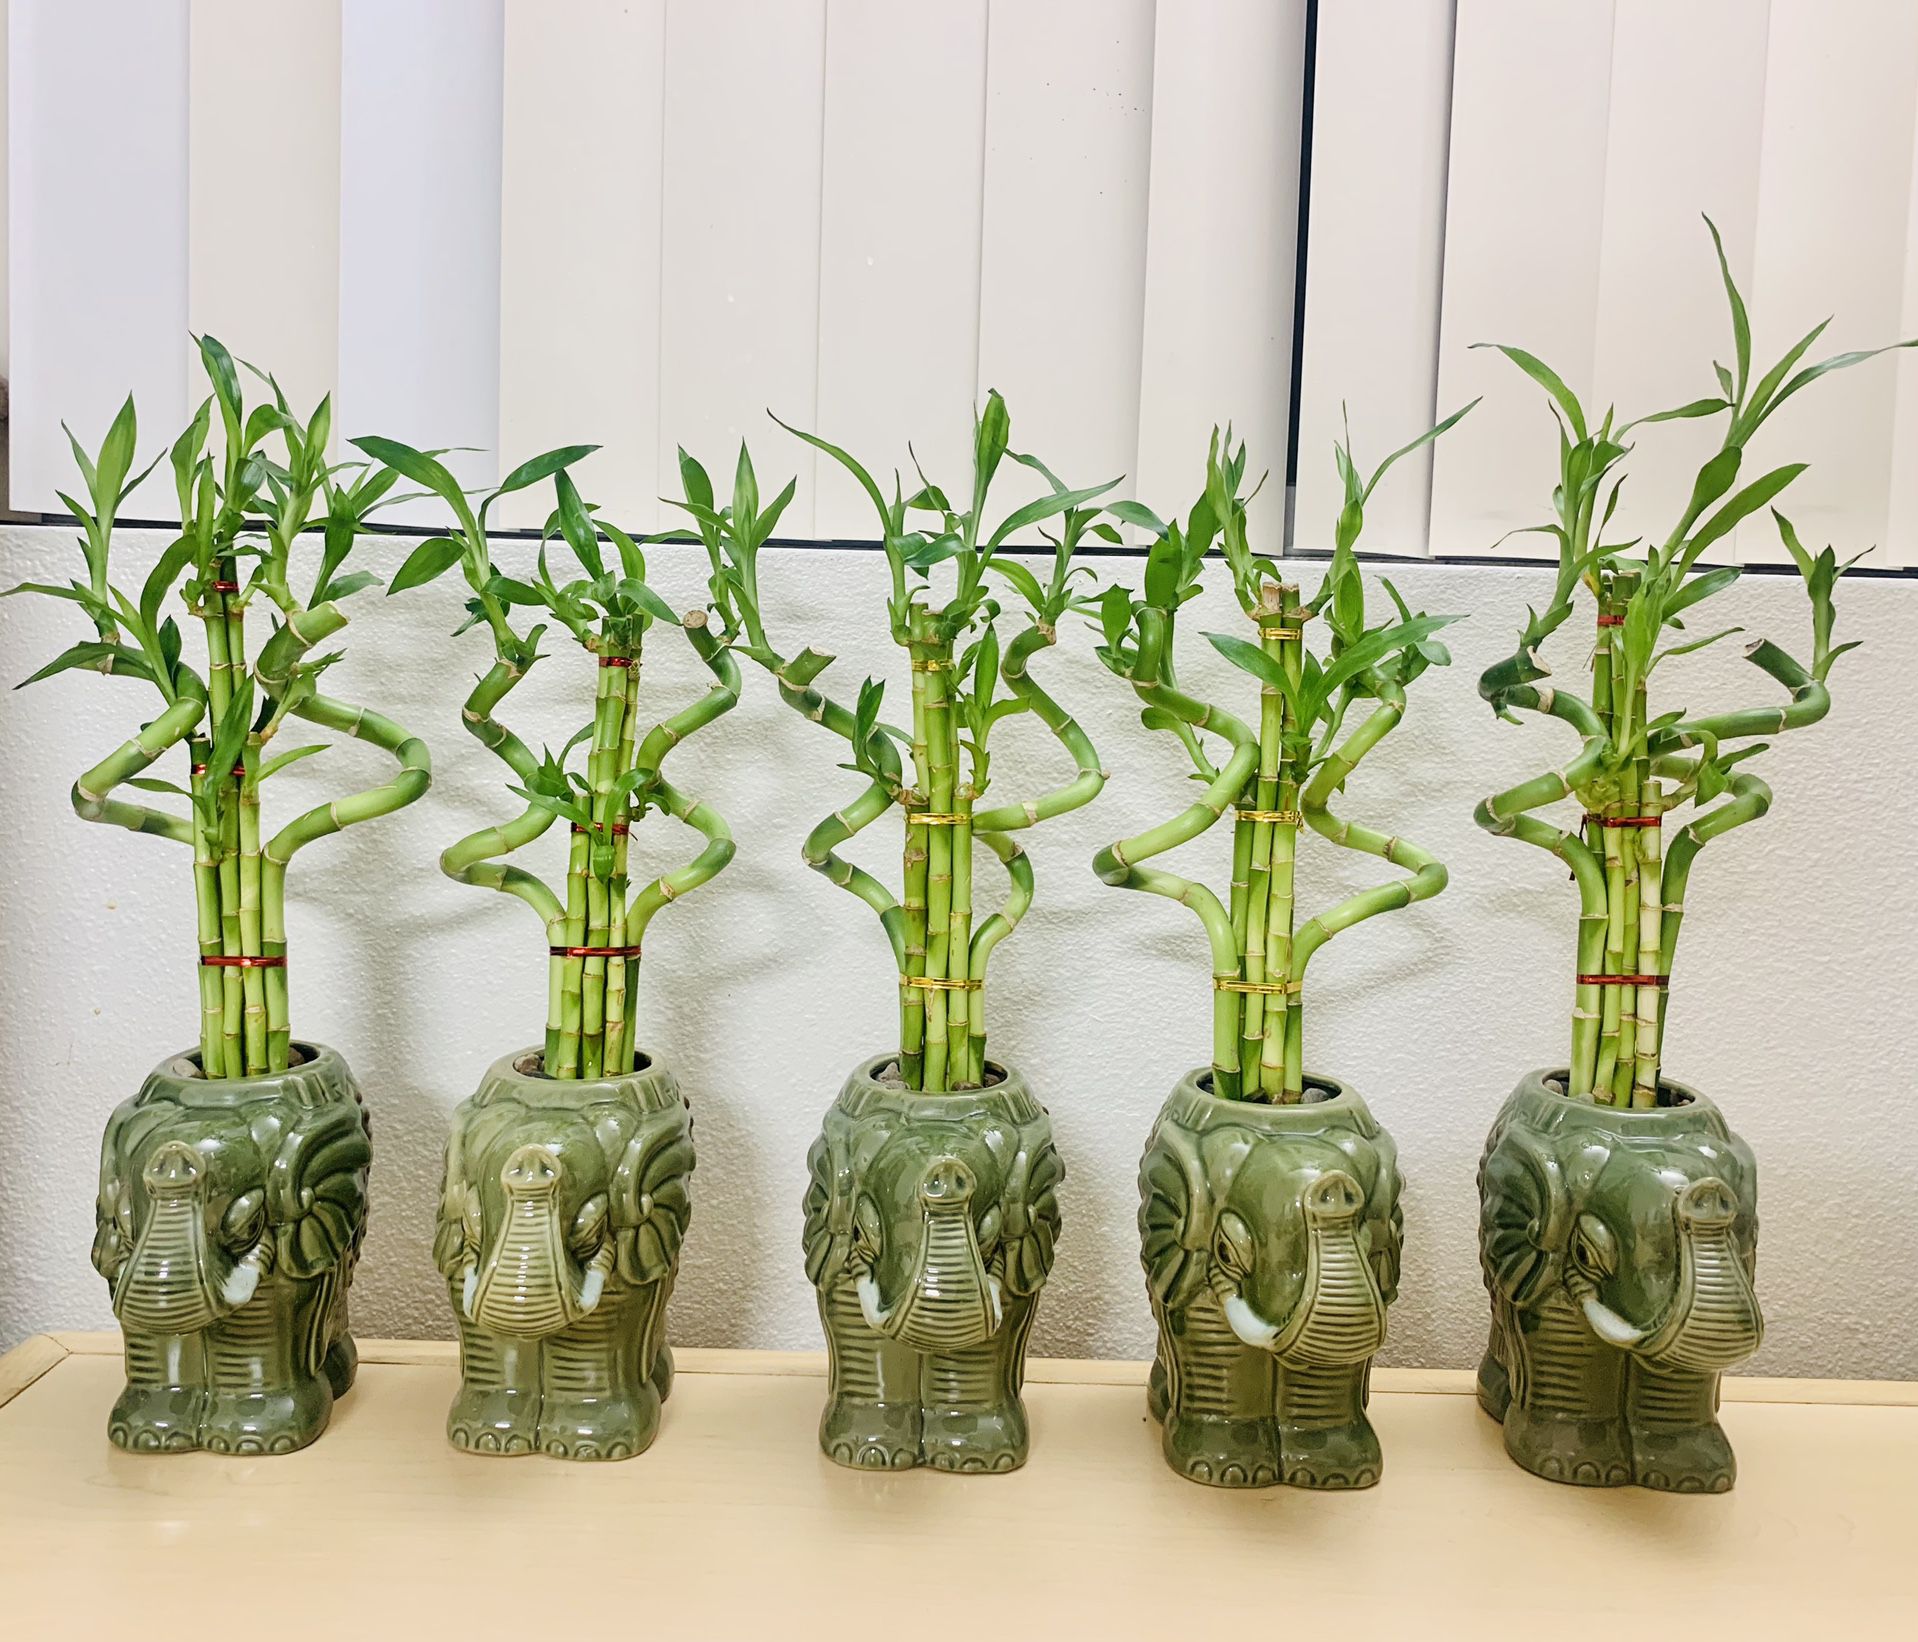 Lucky Bamboo Live Plant In Ceramic Elephant Pot About 15" Tall $15/each